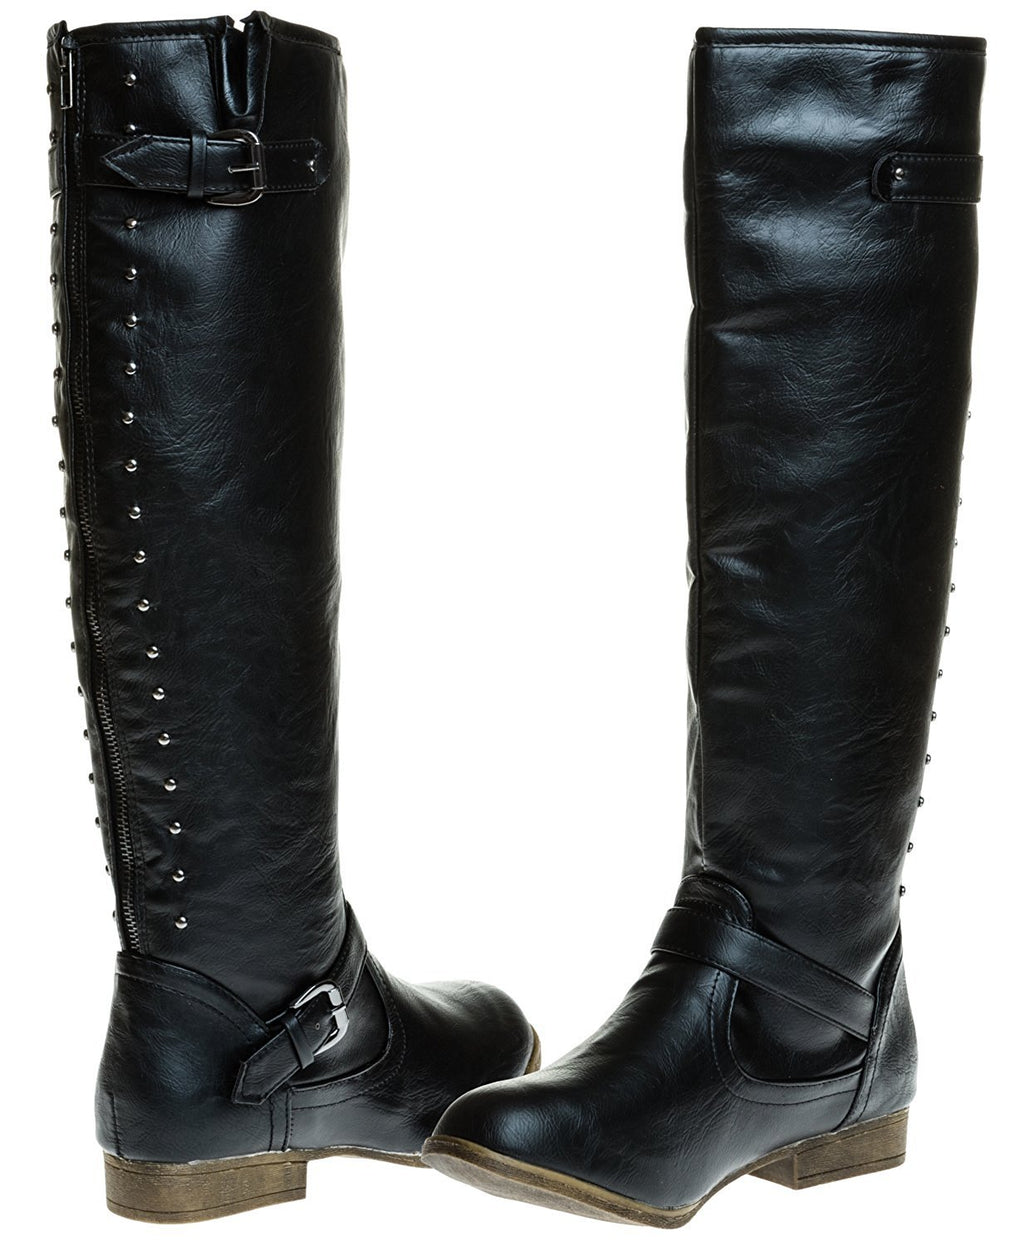 Sara Z Ladies Riding Boot with Back Studs (Black), Size 9